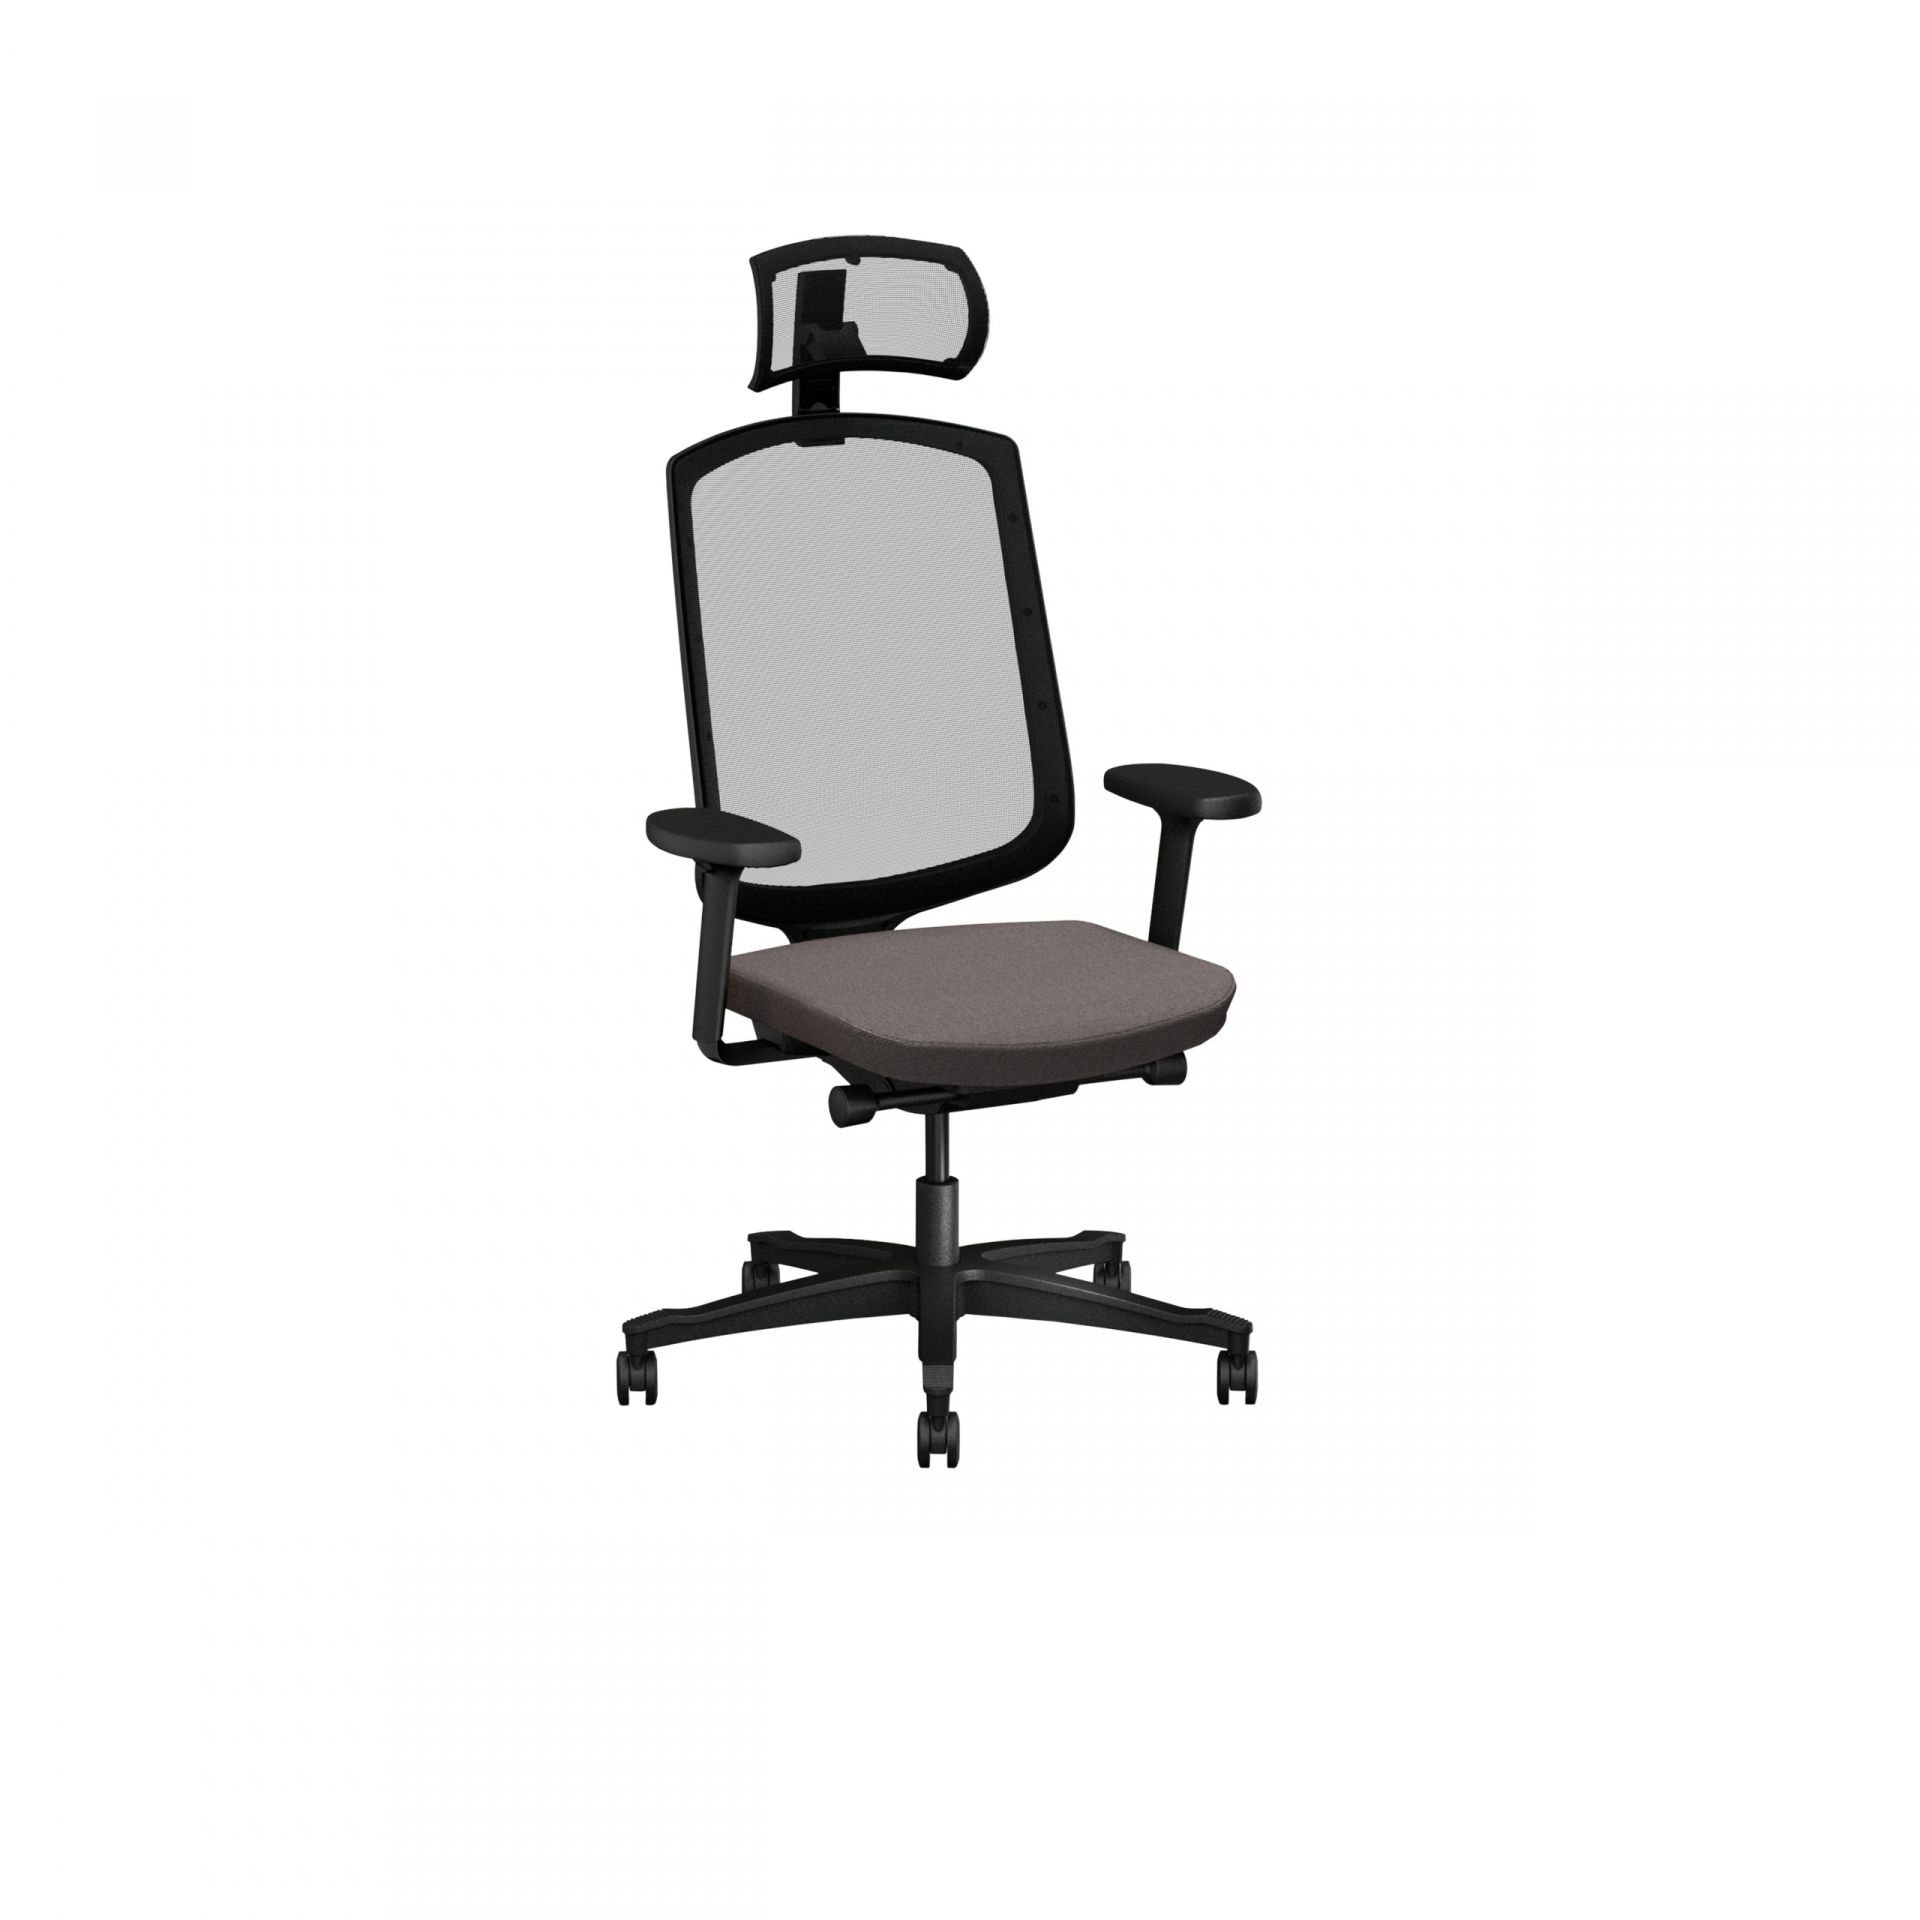 One Office chair